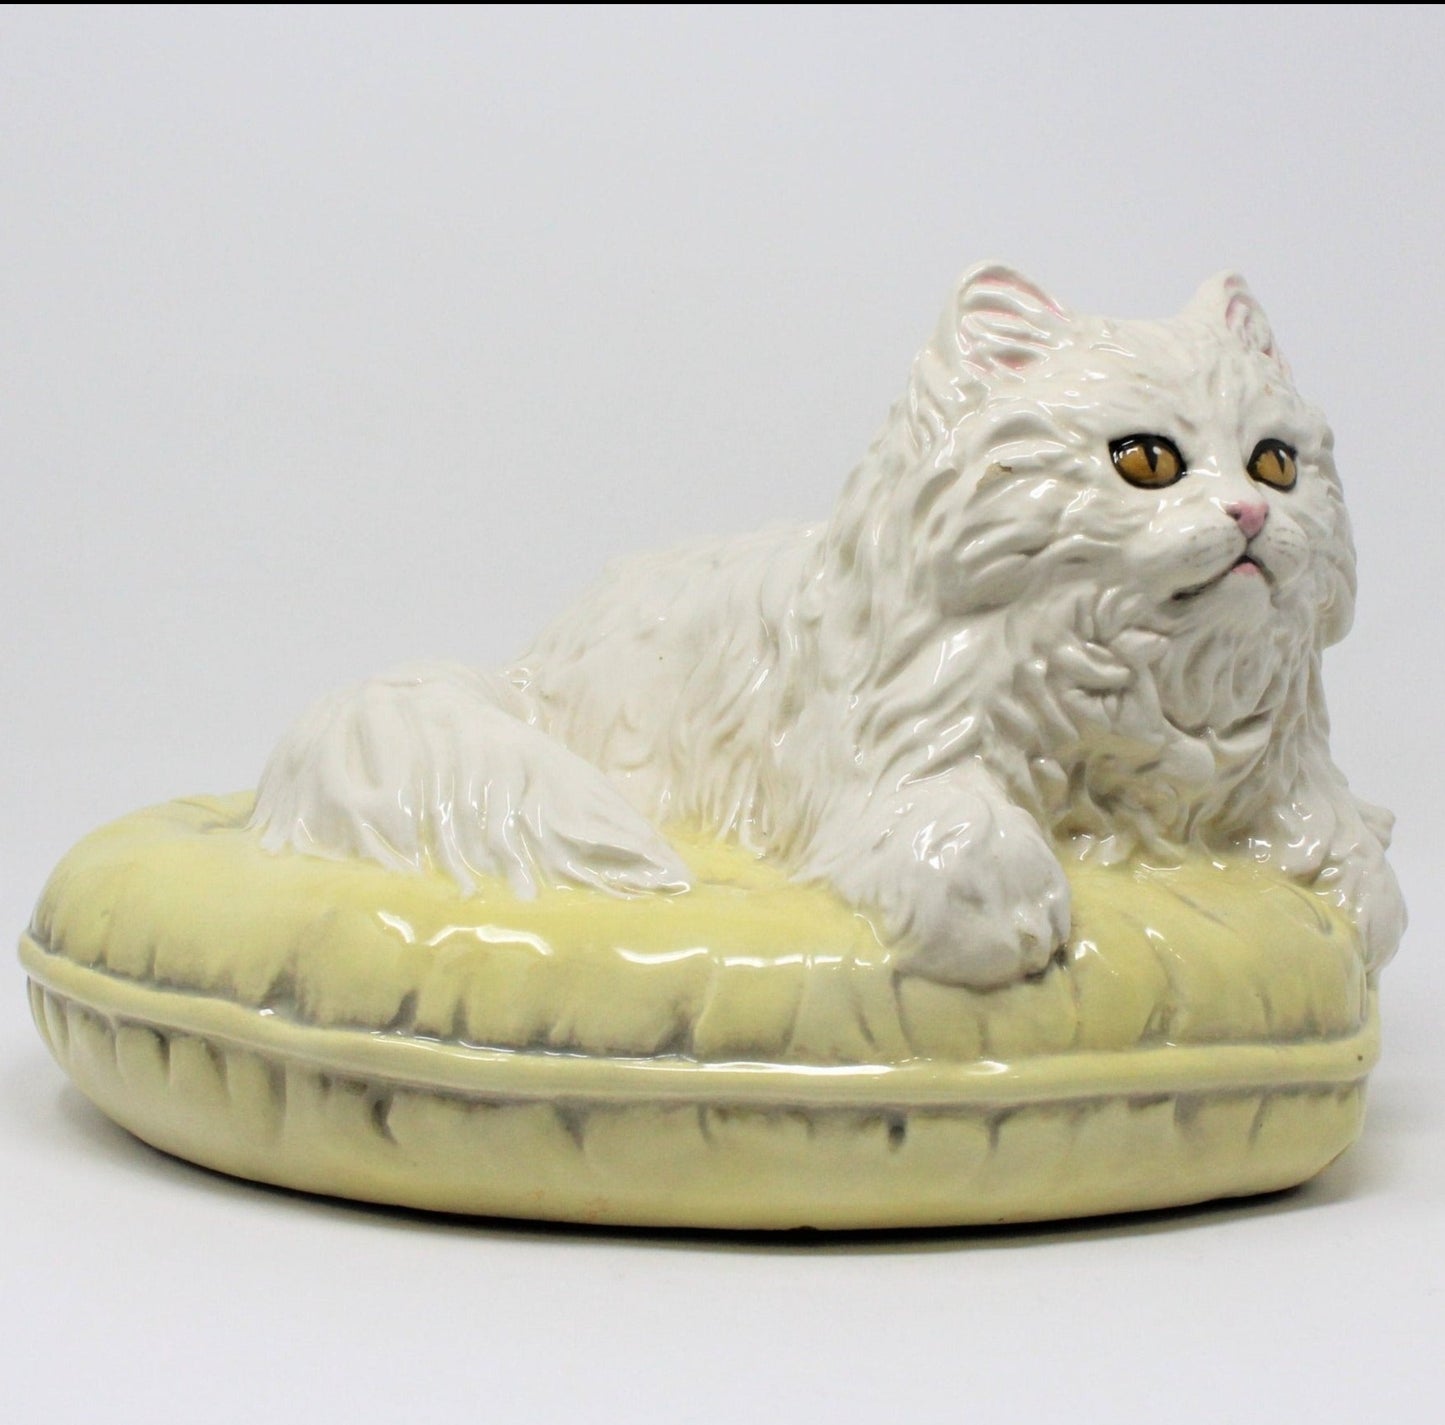 Sculpture, Townsend Ceramics, Persian Cat on Heart Pillow, Signed, Vintage 1971